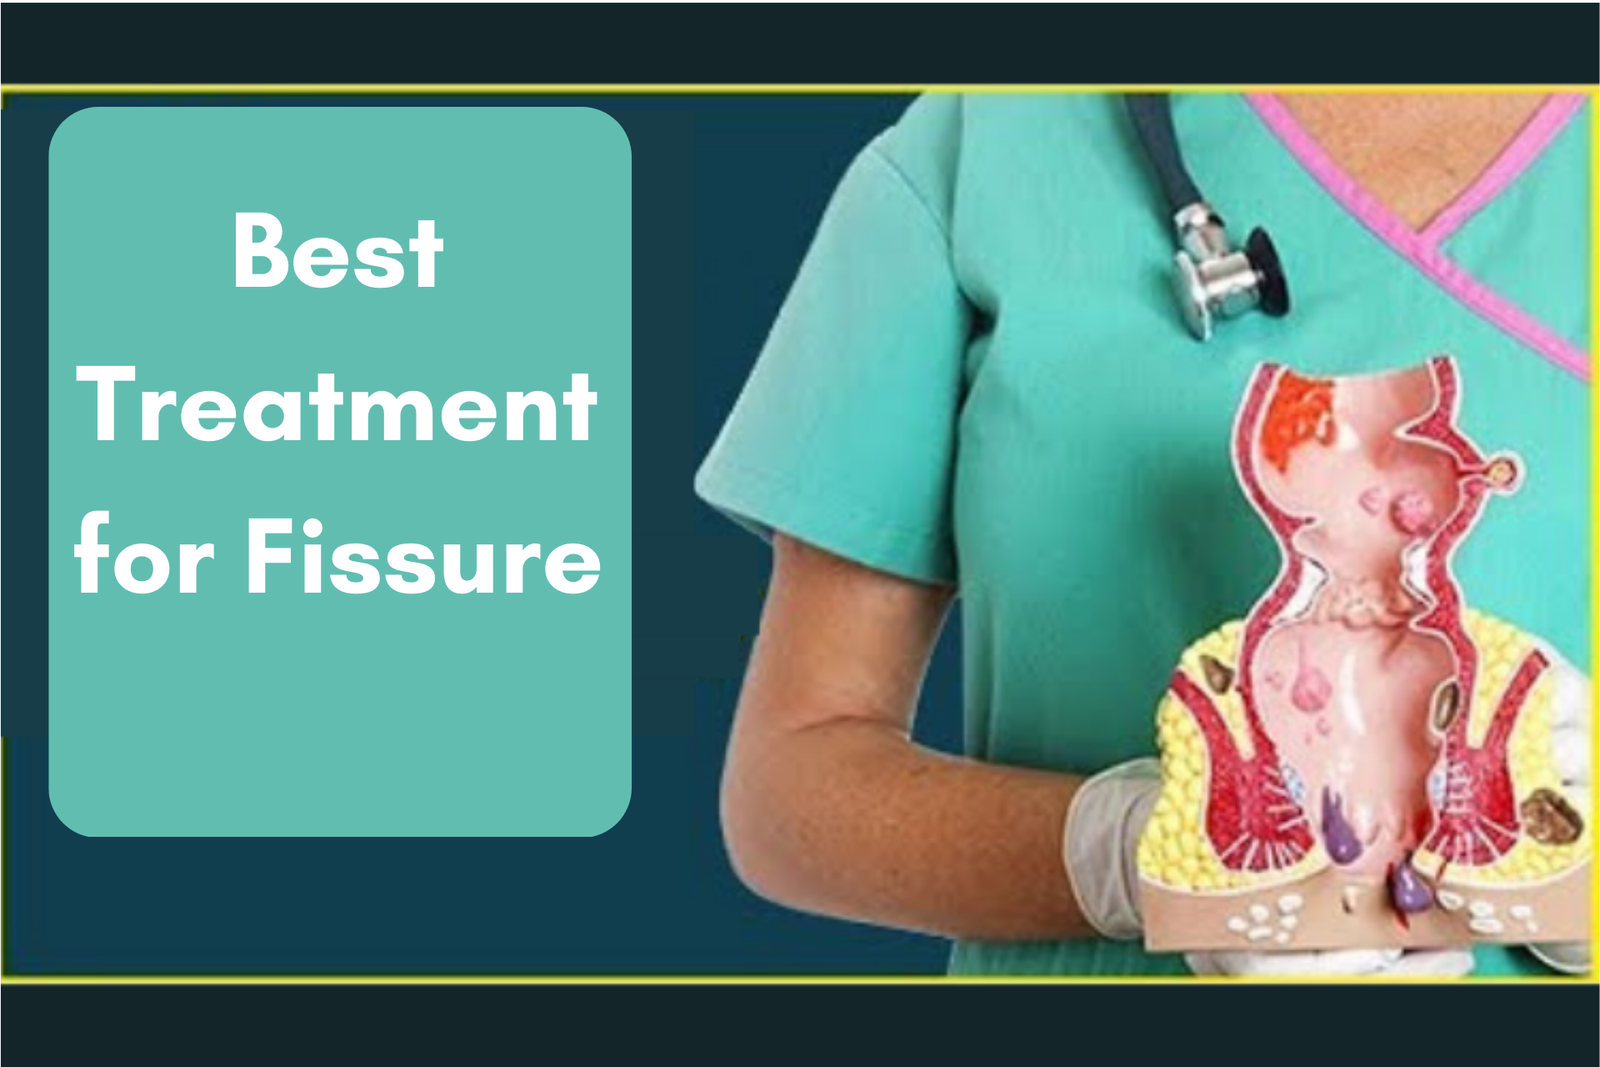 Best Treatment for Fissure